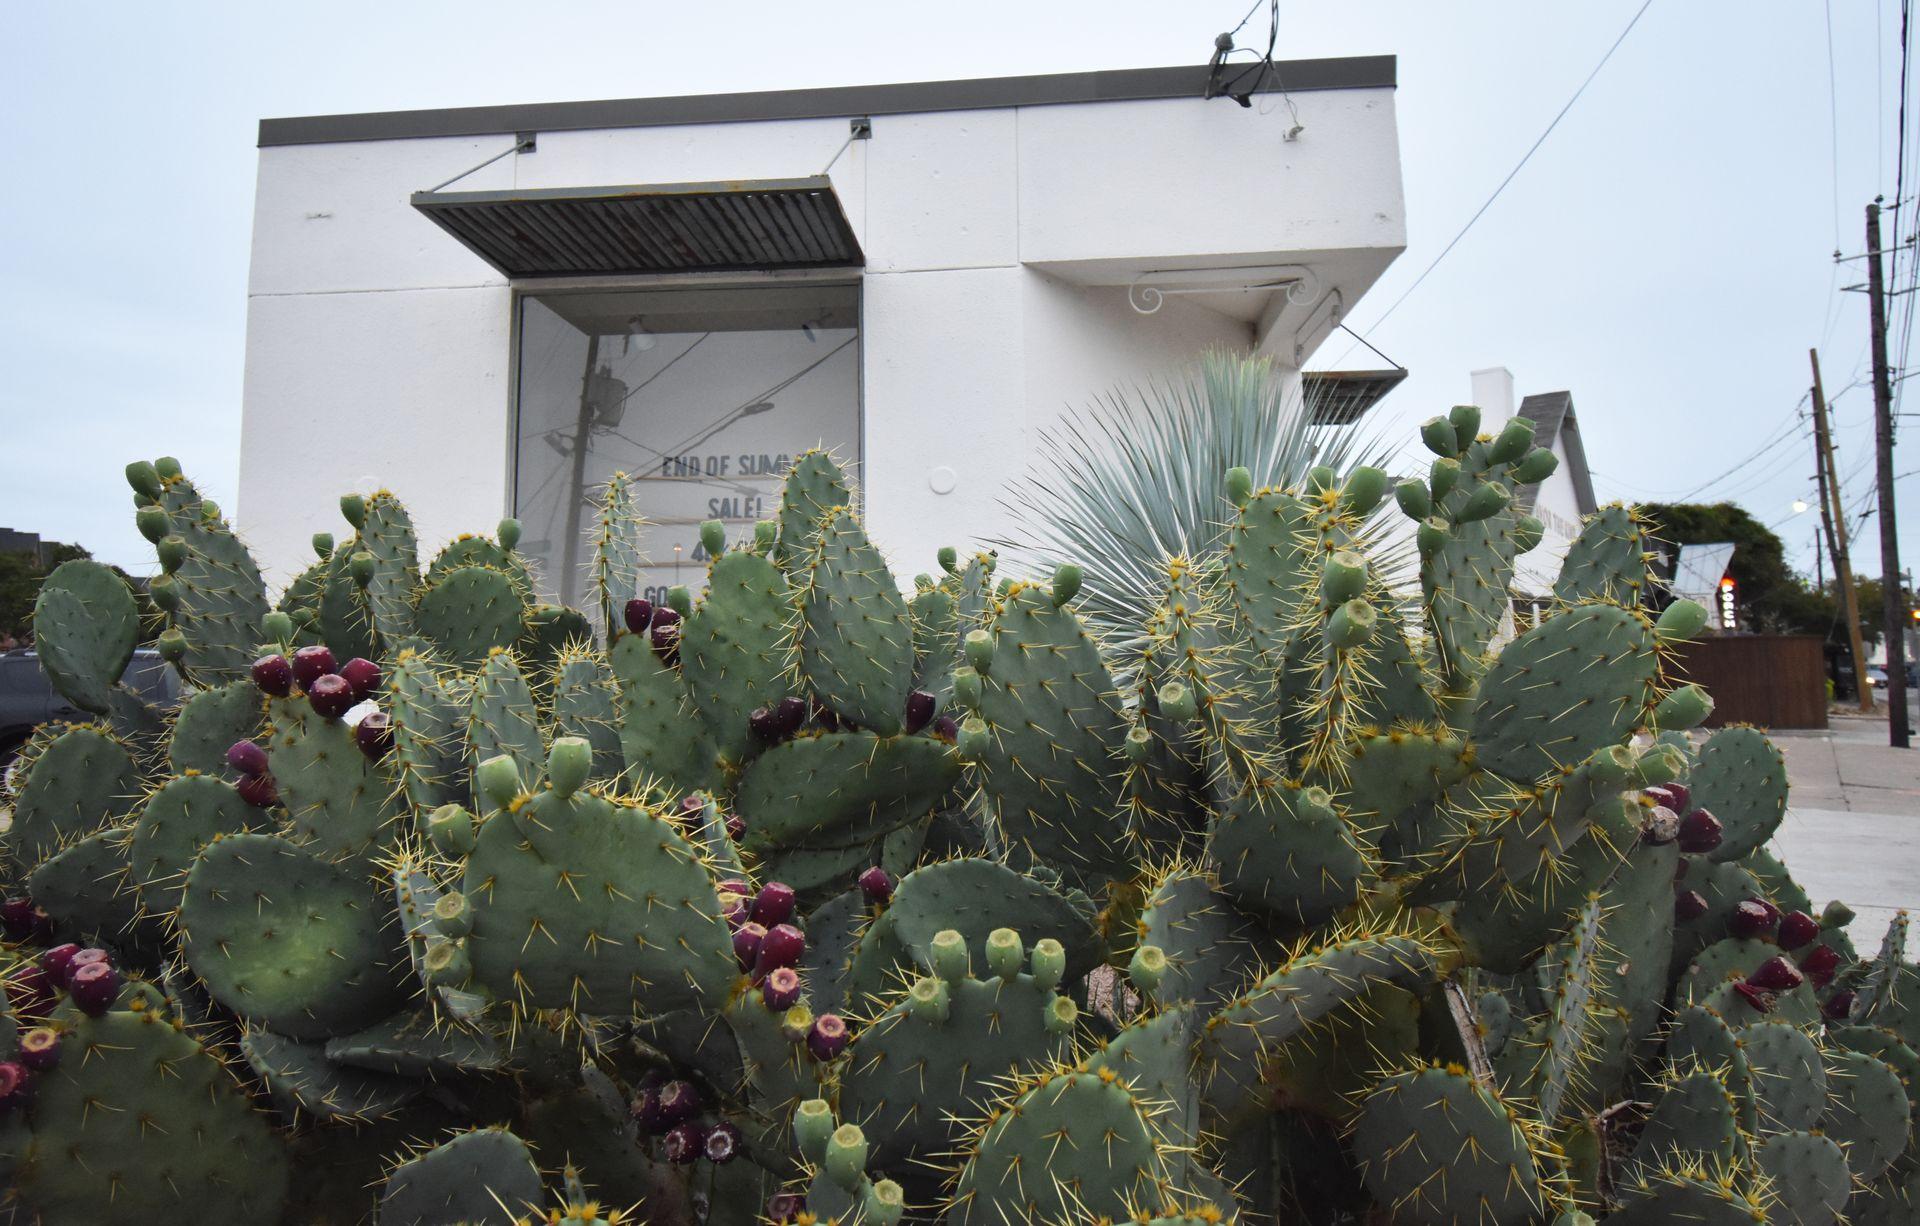 A view of cacti with the white storefront for Favor the Kind in the background.